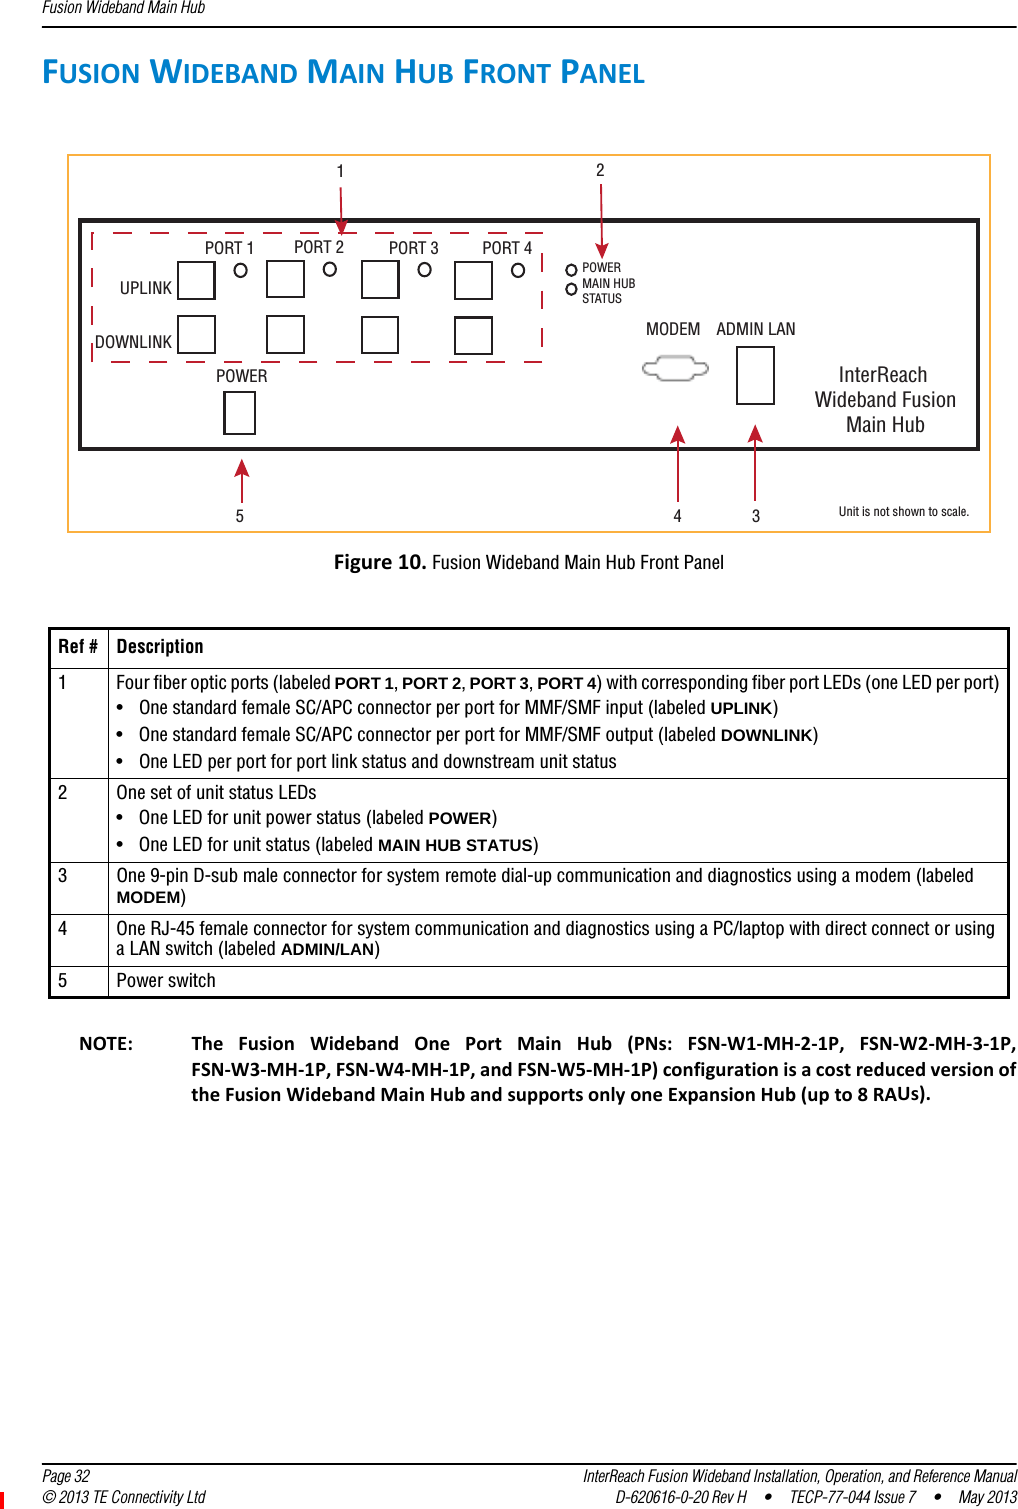 Fusion Wideband Main Hub  Page 32 InterReach Fusion Wideband Installation, Operation, and Reference Manual© 2013 TE Connectivity Ltd D-620616-0-20 Rev H  •  TECP-77-044 Issue 7  •  May 2013FUSIONWIDEBANDMAINHUBFRONTPANELFigure10.Fusion Wideband Main Hub Front PanelNOTE: TheFusionWidebandOnePortMainHub(PNs:FSN‐W1‐MH‐2‐1P,FSN‐W2‐MH‐3‐1P,FSN‐W3‐MH‐1P,FSN‐W4‐MH‐1P,andFSN‐W5‐MH‐1P)configurationisacostreducedversionoftheFusionWidebandMainHubandsupportsonlyoneExpansionHub(upto8RAUs).Ref # Description1Four fiber optic ports (labeled PORT 1, PORT 2, PORT 3, PORT 4) with corresponding fiber port LEDs (one LED per port)• One standard female SC/APC connector per port for MMF/SMF input (labeled UPLINK)• One standard female SC/APC connector per port for MMF/SMF output (labeled DOWNLINK)• One LED per port for port link status and downstream unit status 2One set of unit status LEDs• One LED for unit power status (labeled POWER)• One LED for unit status (labeled MAIN HUB STATUS)3One 9-pin D-sub male connector for system remote dial-up communication and diagnostics using a modem (labeled MODEM)4One RJ-45 female connector for system communication and diagnostics using a PC/laptop with direct connect or using a LAN switch (labeled ADMIN/LAN)5Power switchPOWERMAIN HUBSTATUSUPLINKDOWNLINKPORT 1 PORT 2 PORT 3 PORT 4POWER InterReach Wideband FusionMain HubADMIN LANMODEM12345 Unit is not shown to scale.